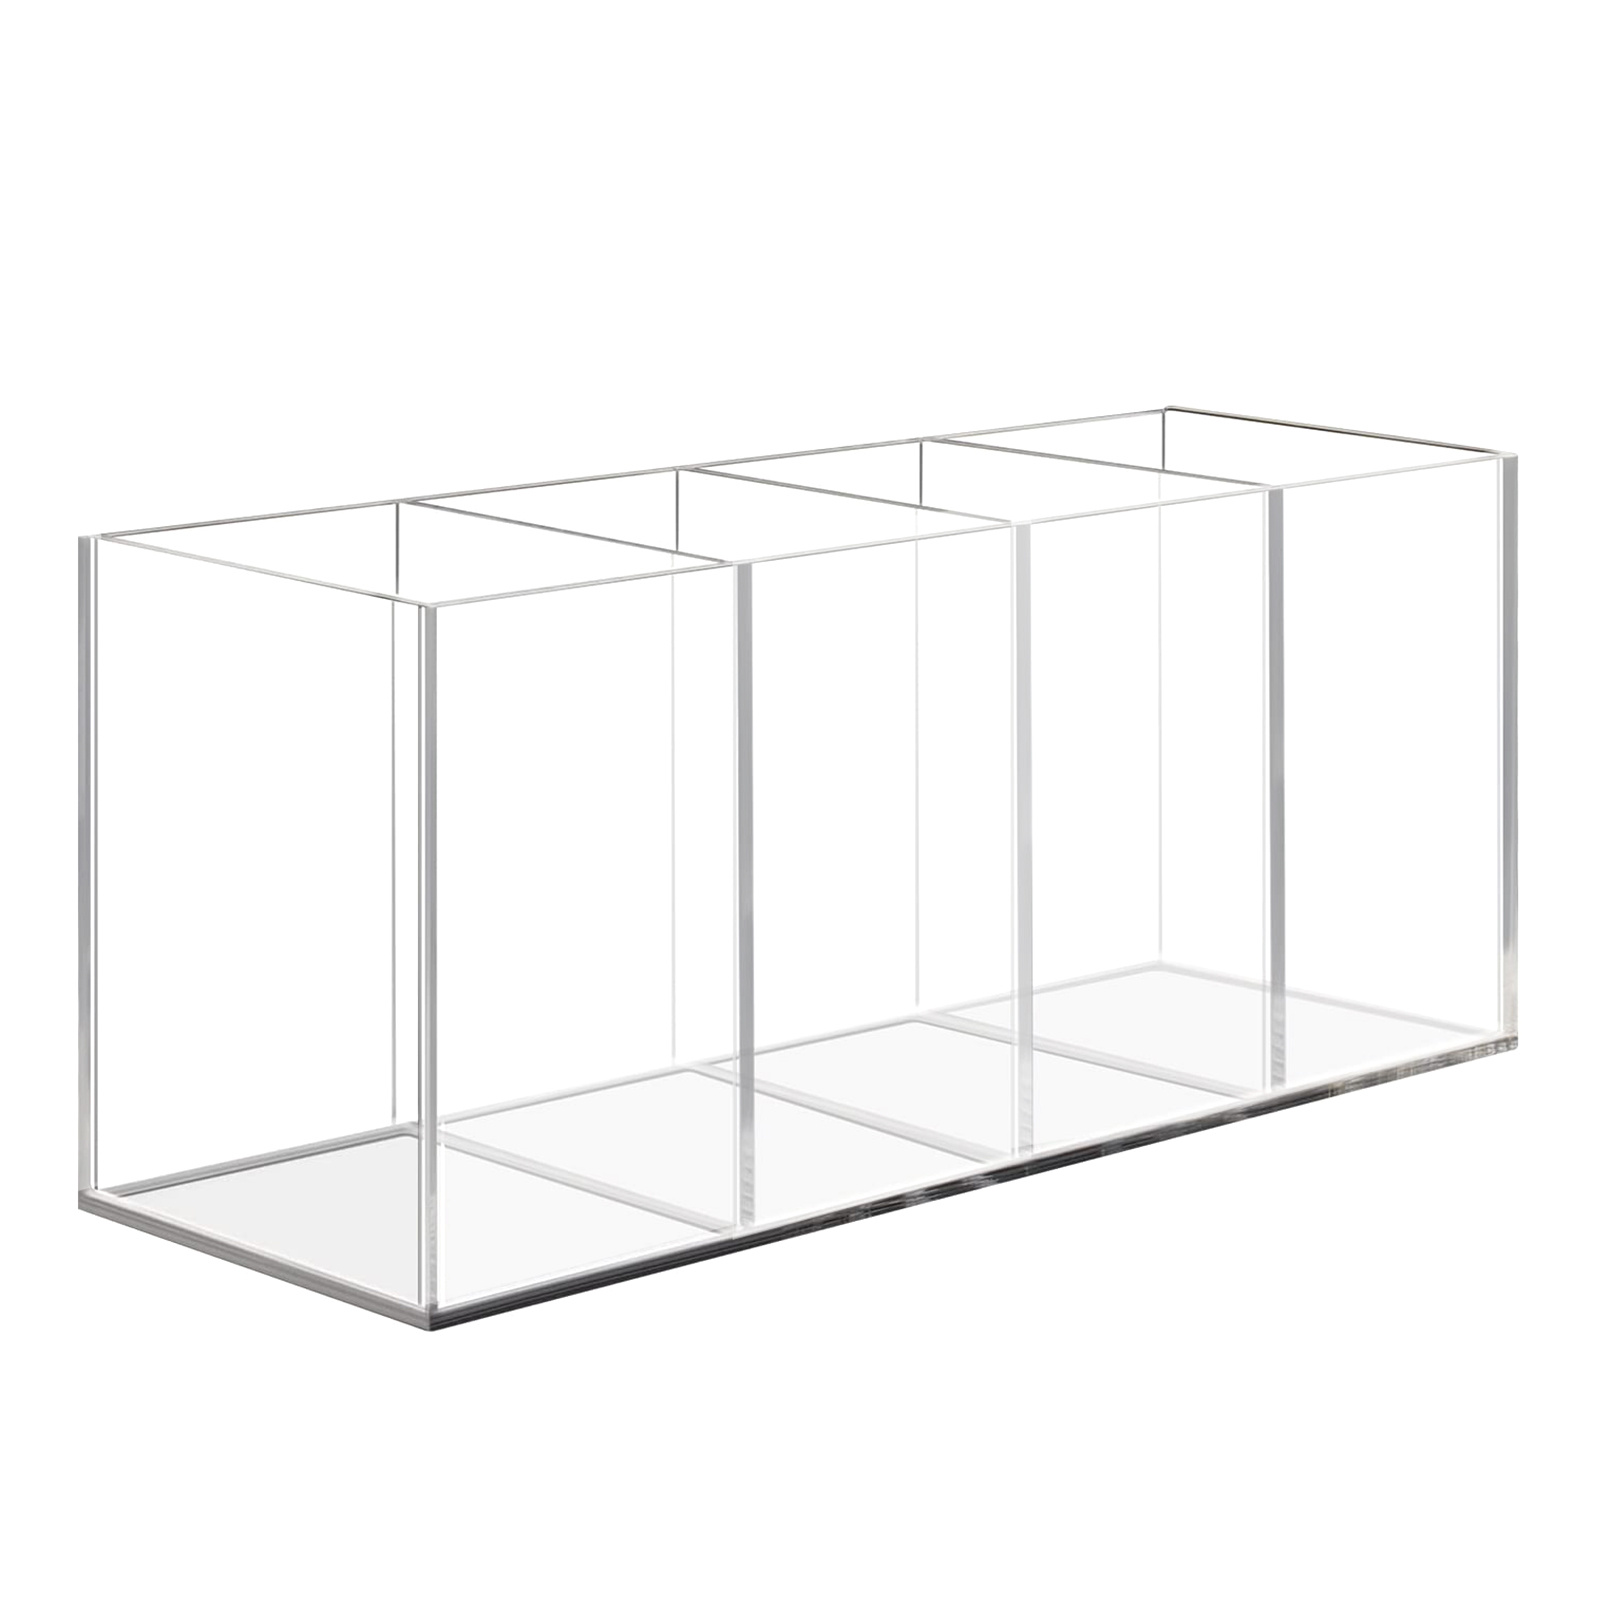 TOMUM 12 Layers Clear Acrylic Display Stand for Pen/Eyebrow Pencil